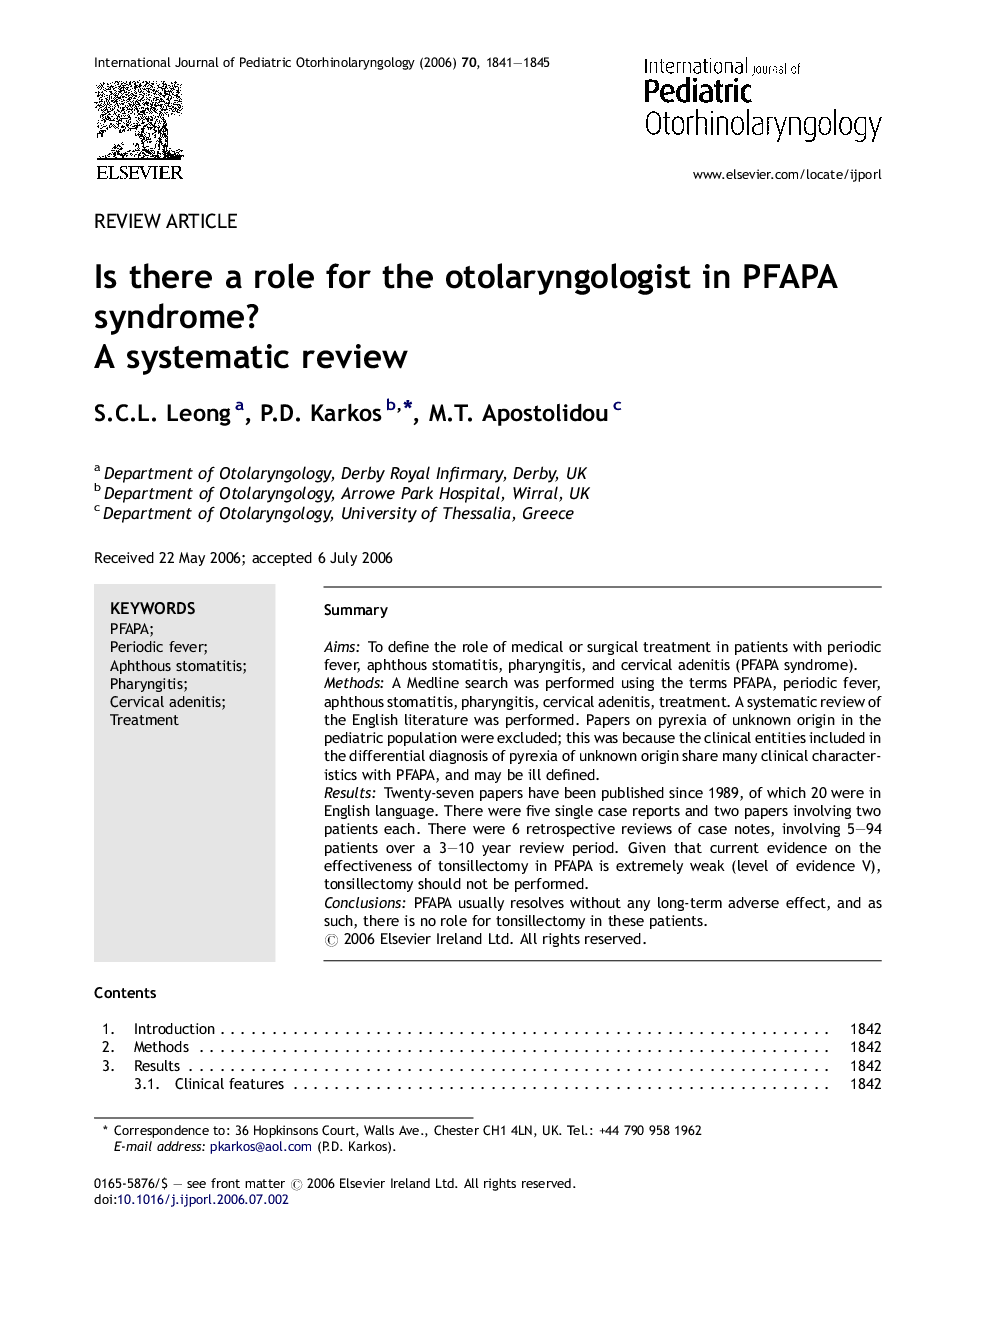 Is there a role for the otolaryngologist in PFAPA syndrome?: A systematic review